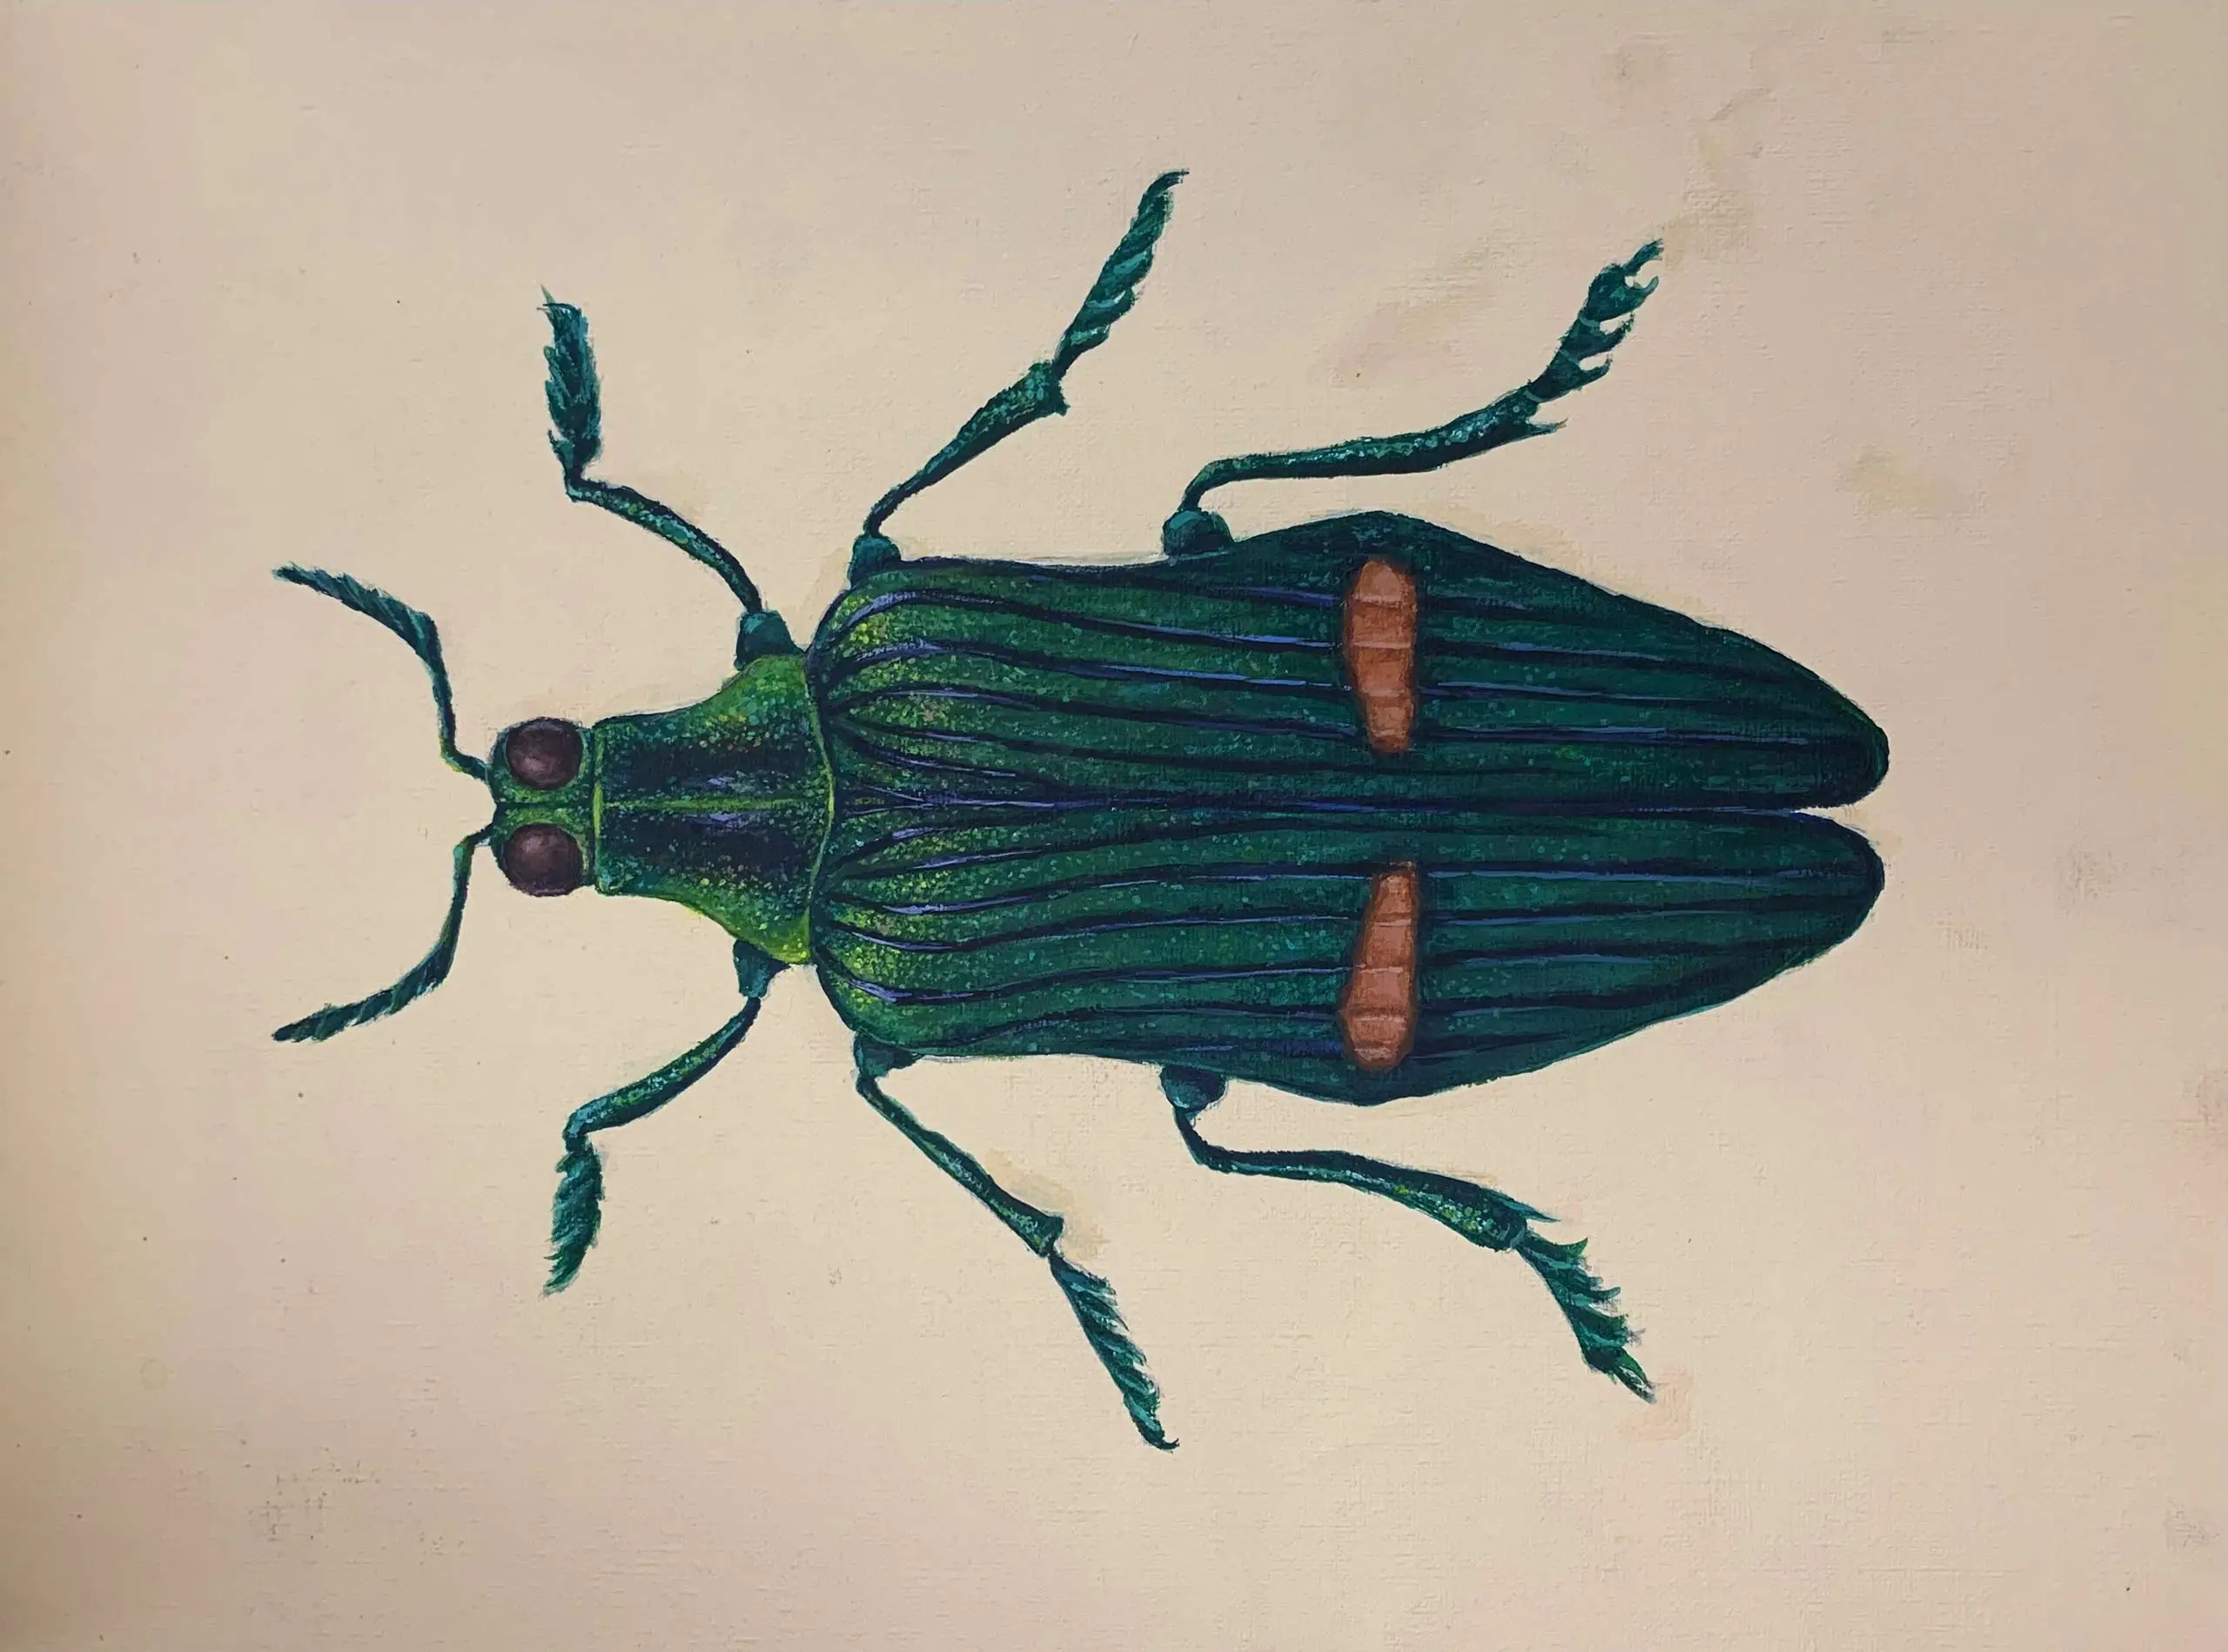 An illustration of a beetle